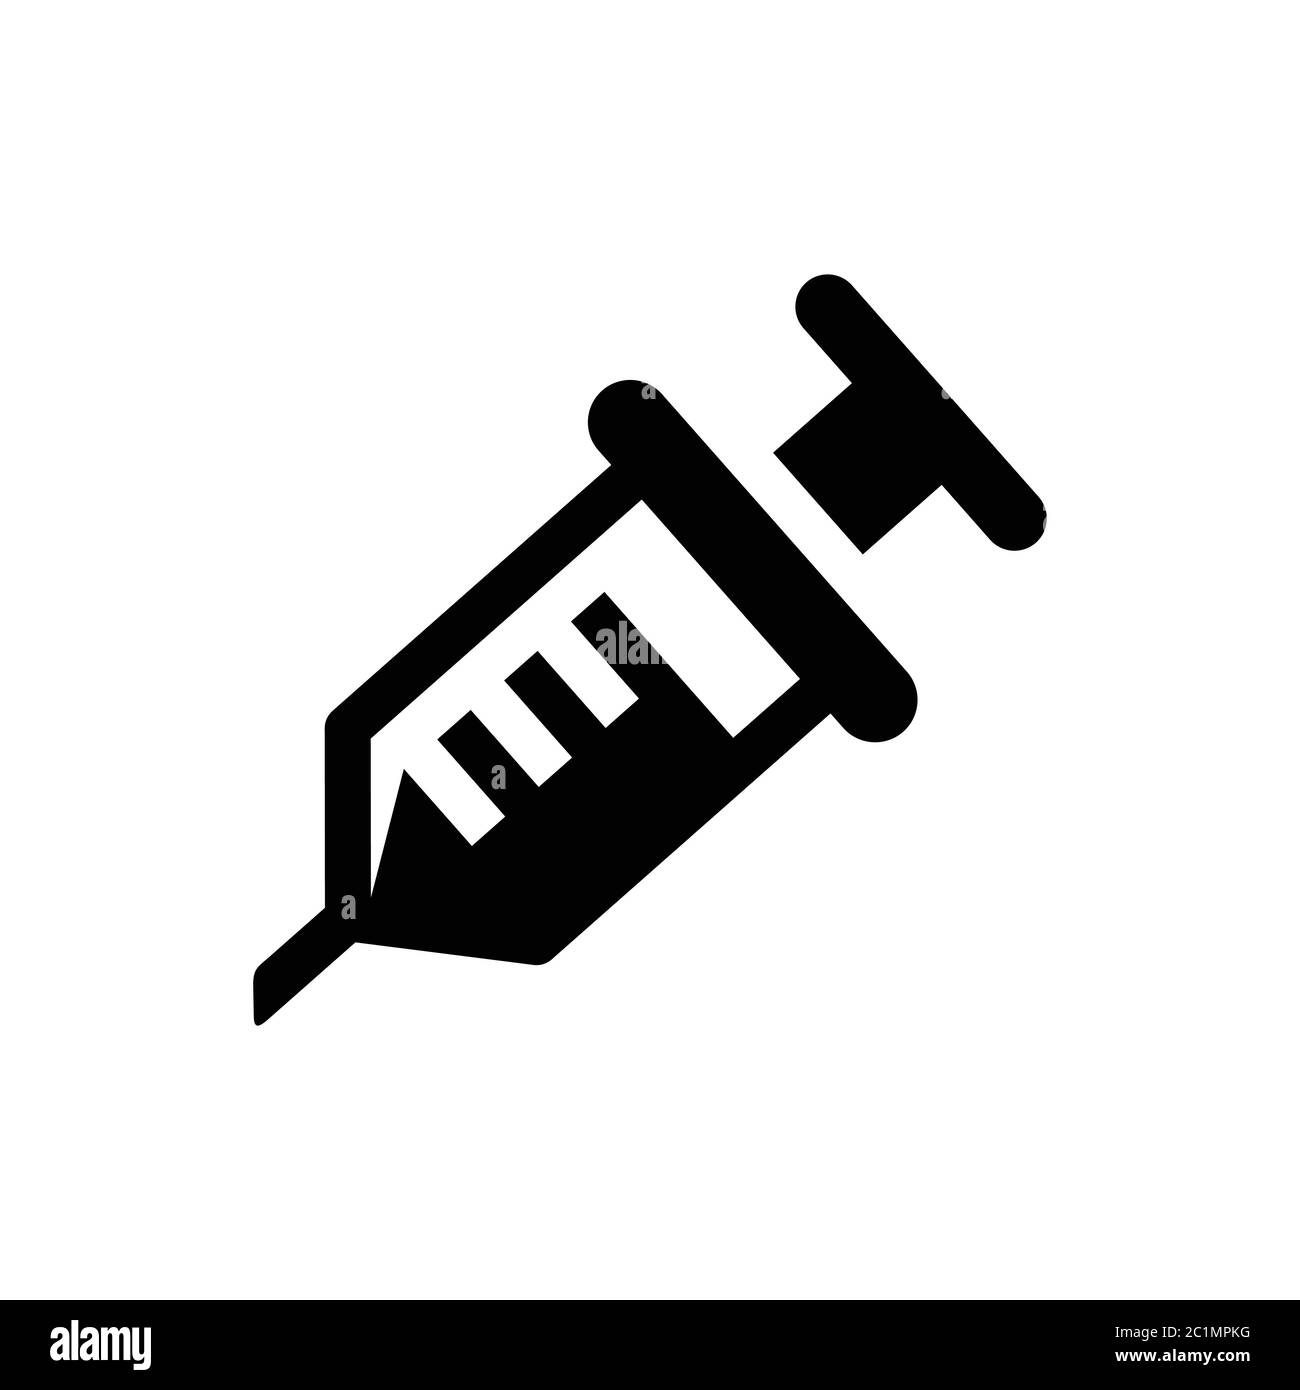 Simple flat syringe icon for patient treatment medical tool. Stock Vector